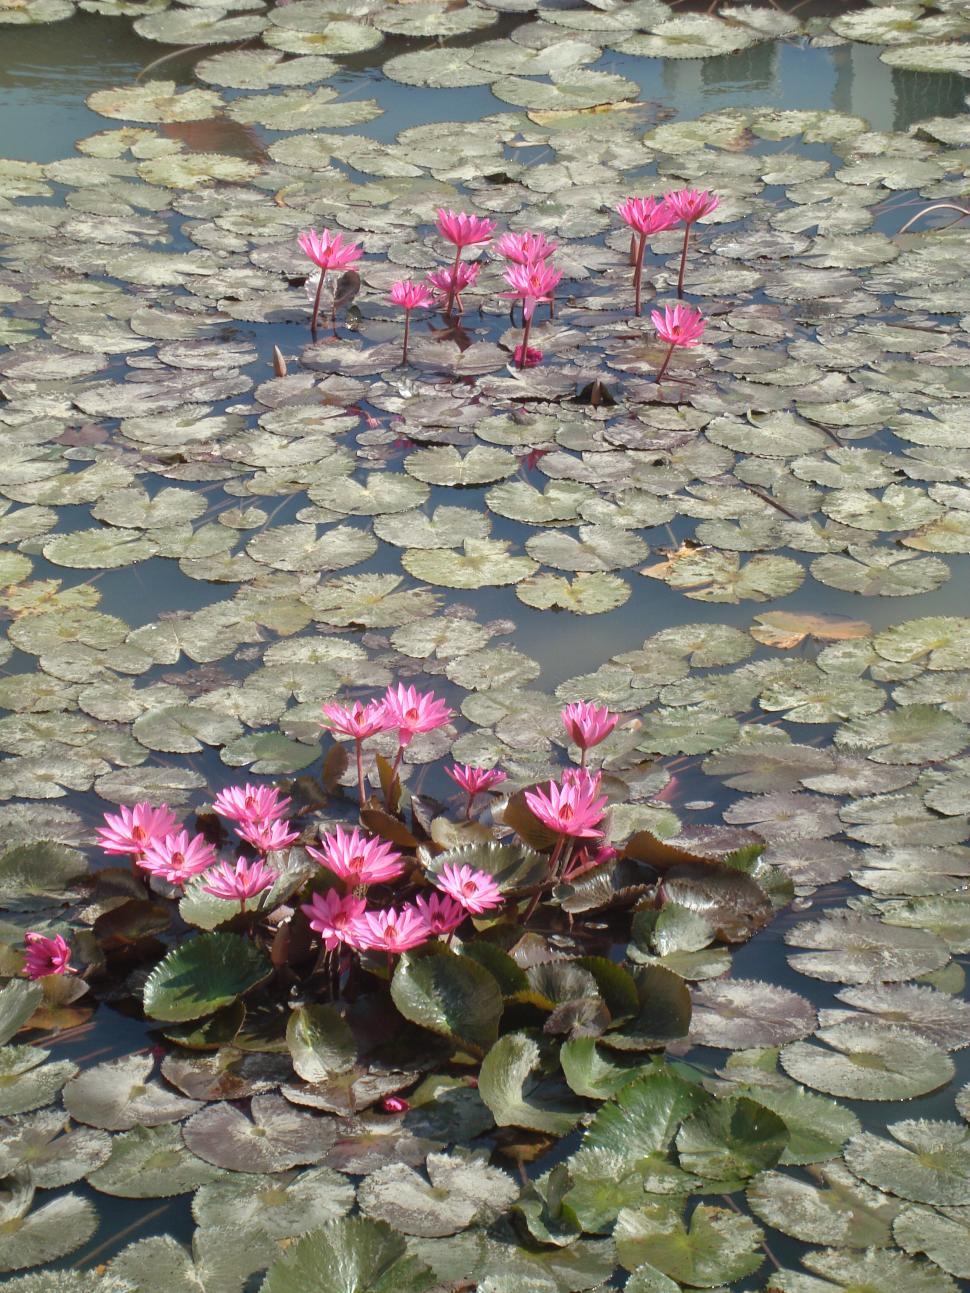 Free Image of Pink Water Lilies Floating Among Lily Pads in Pond 